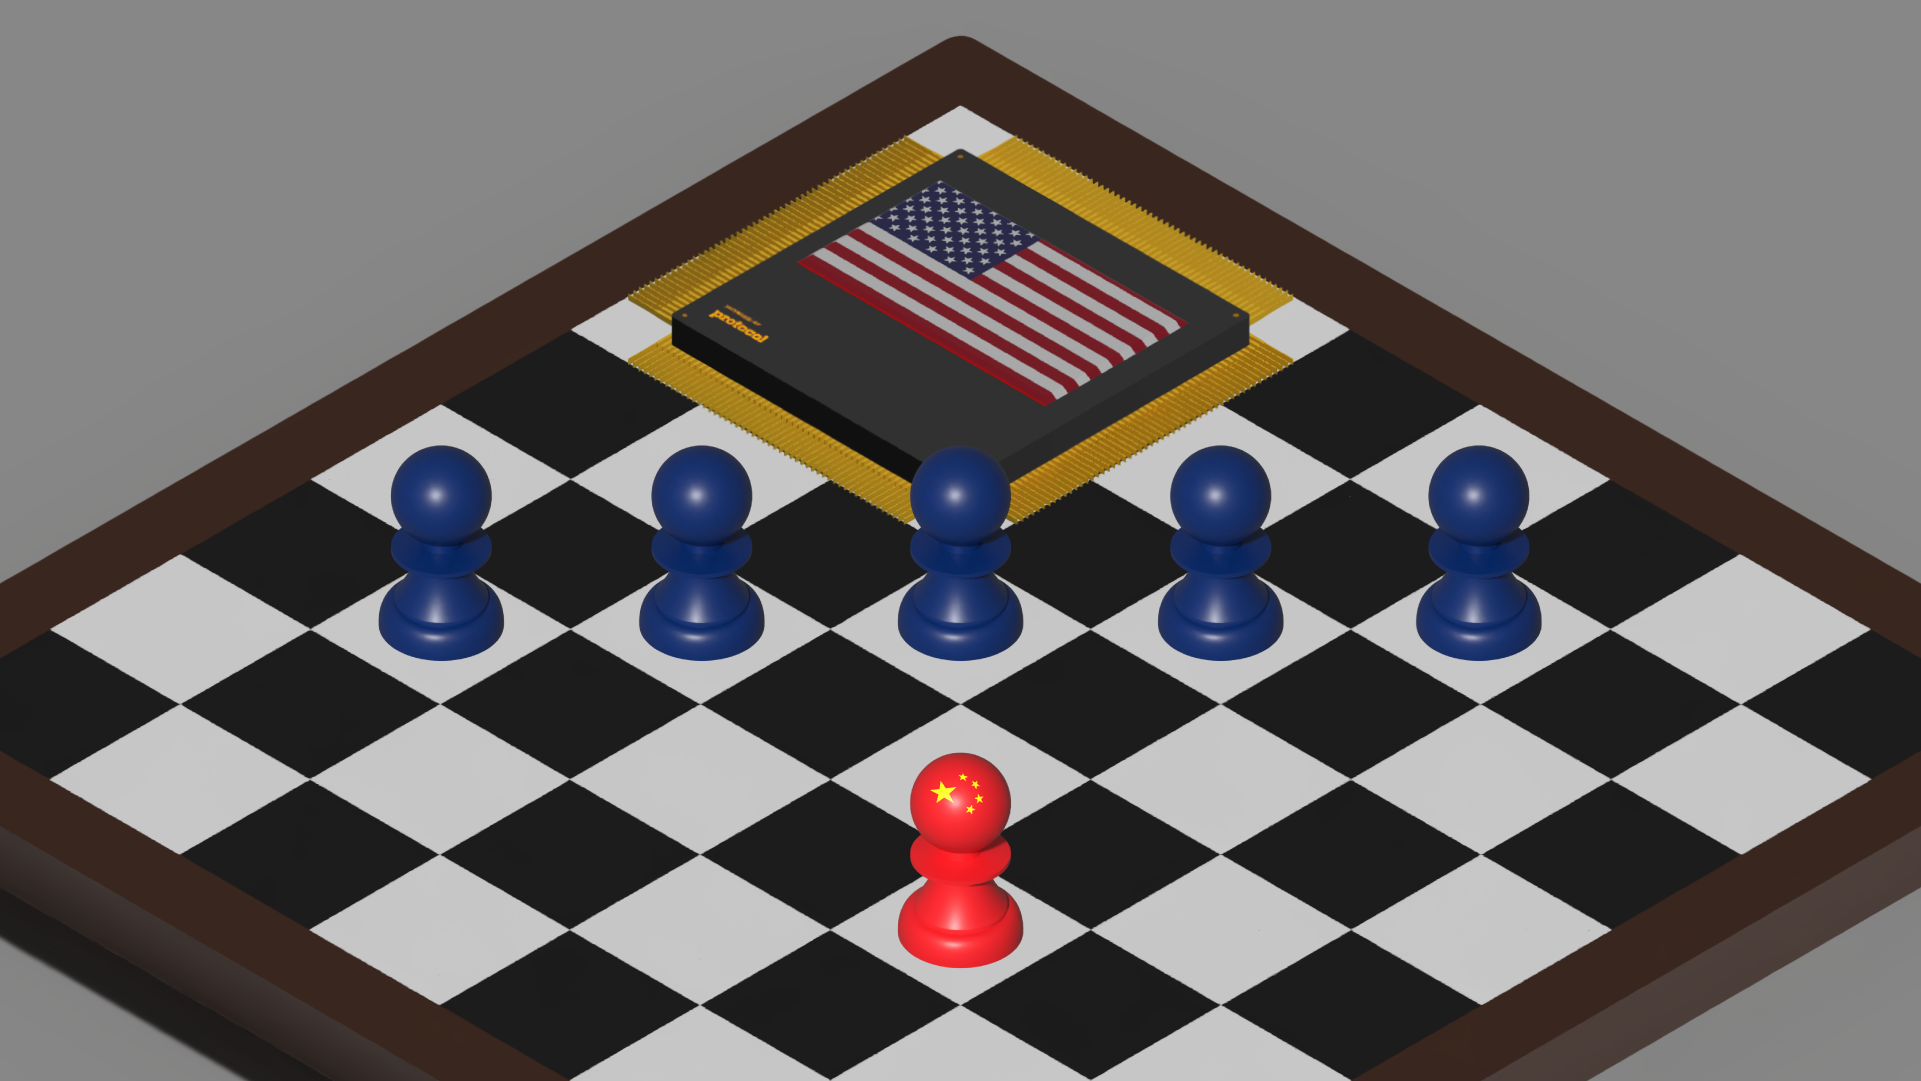 Andrew Lee on X: Chess is a highly strategic game that requires